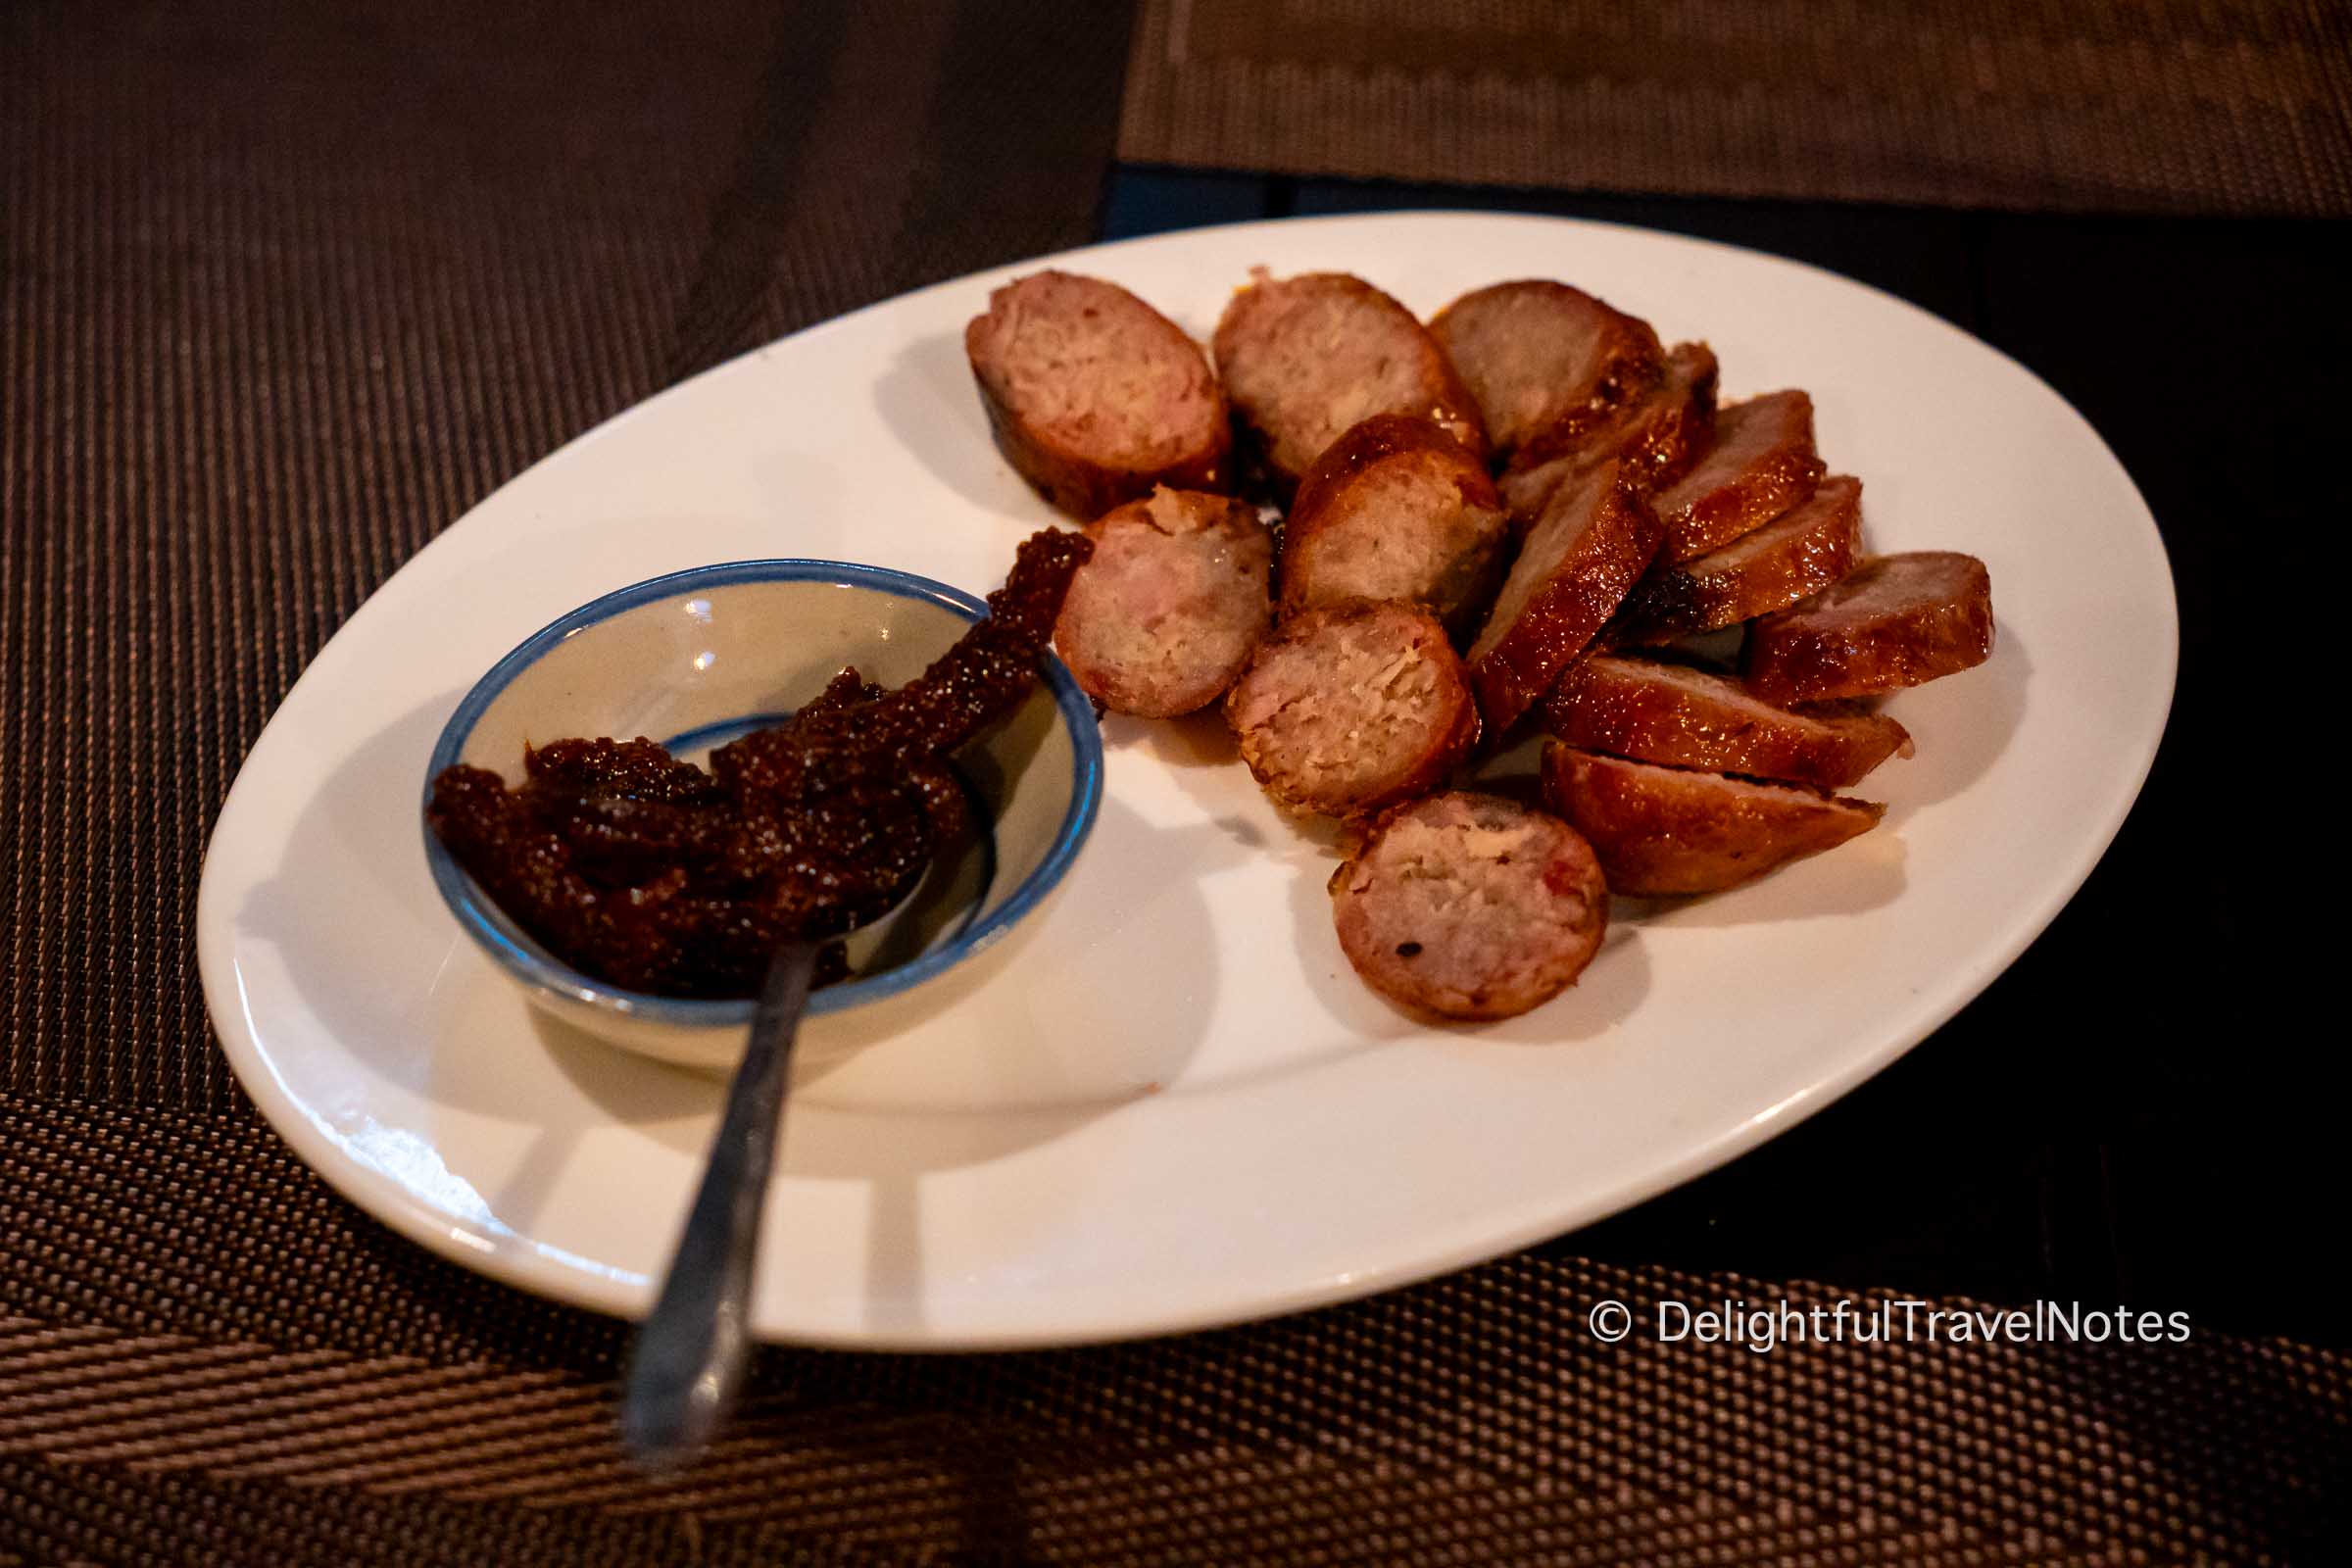 a plate of Luang Prabang sausages at Bamboo Garden, one of the must-try restaurants in Luang Prabang.